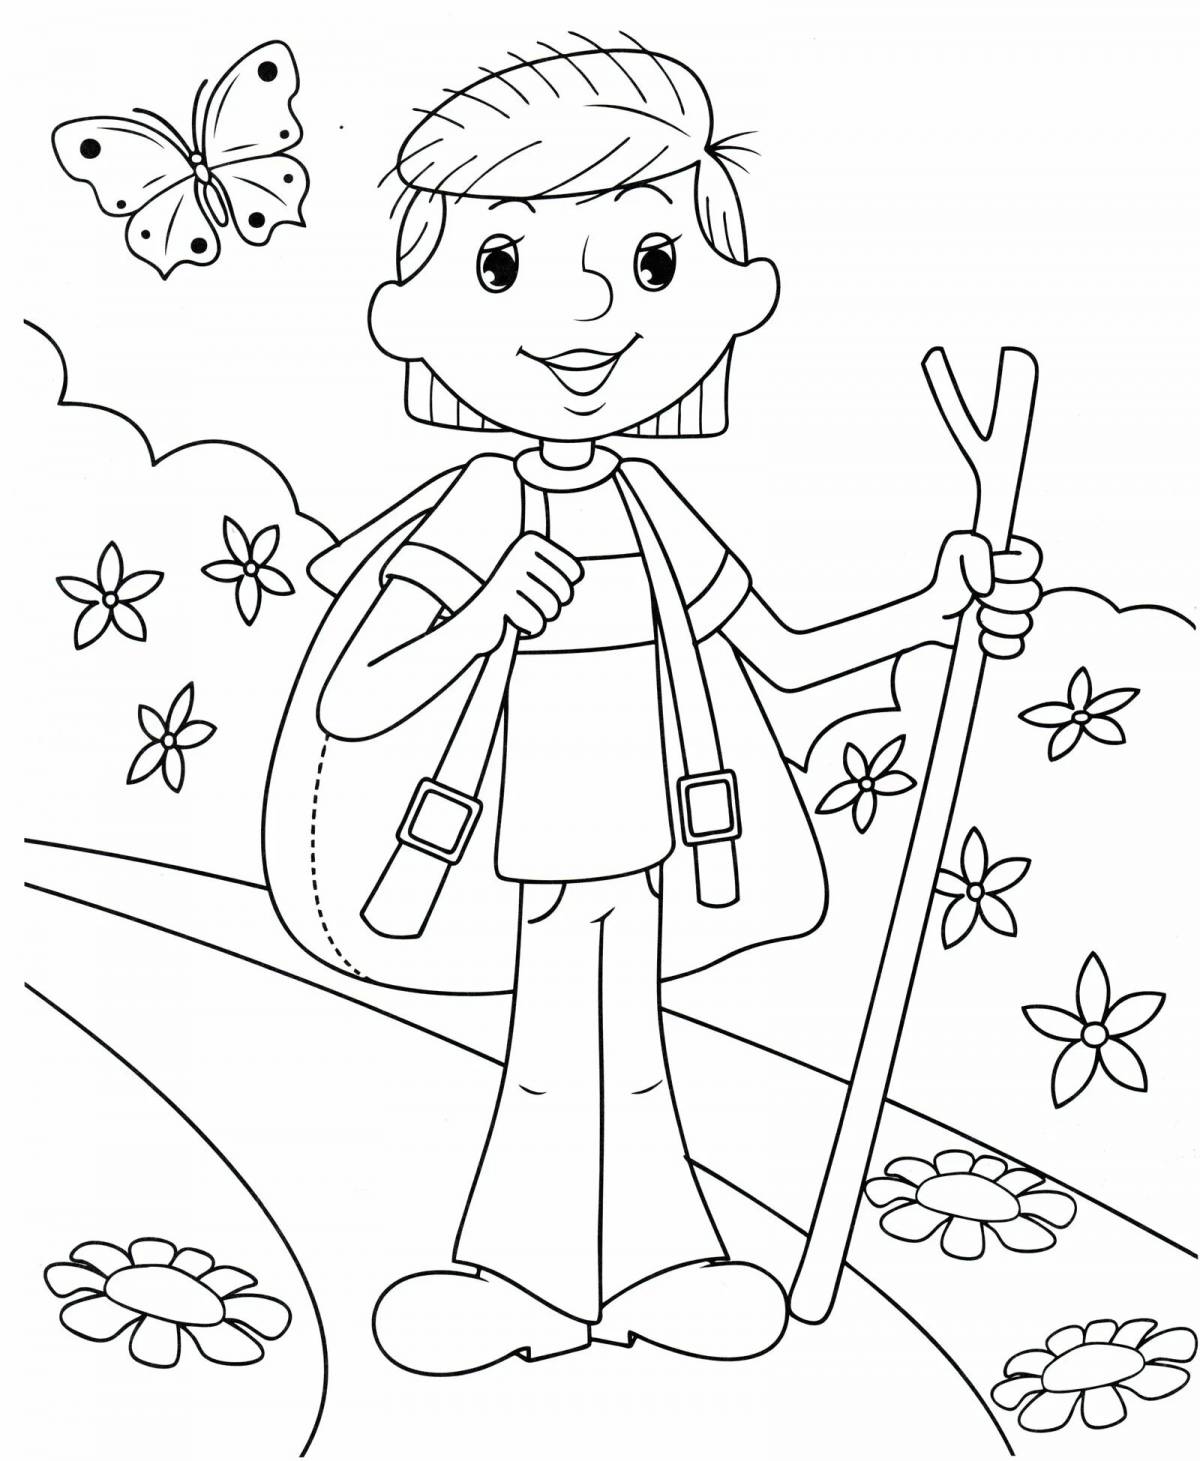 Attractive uncle coloring page